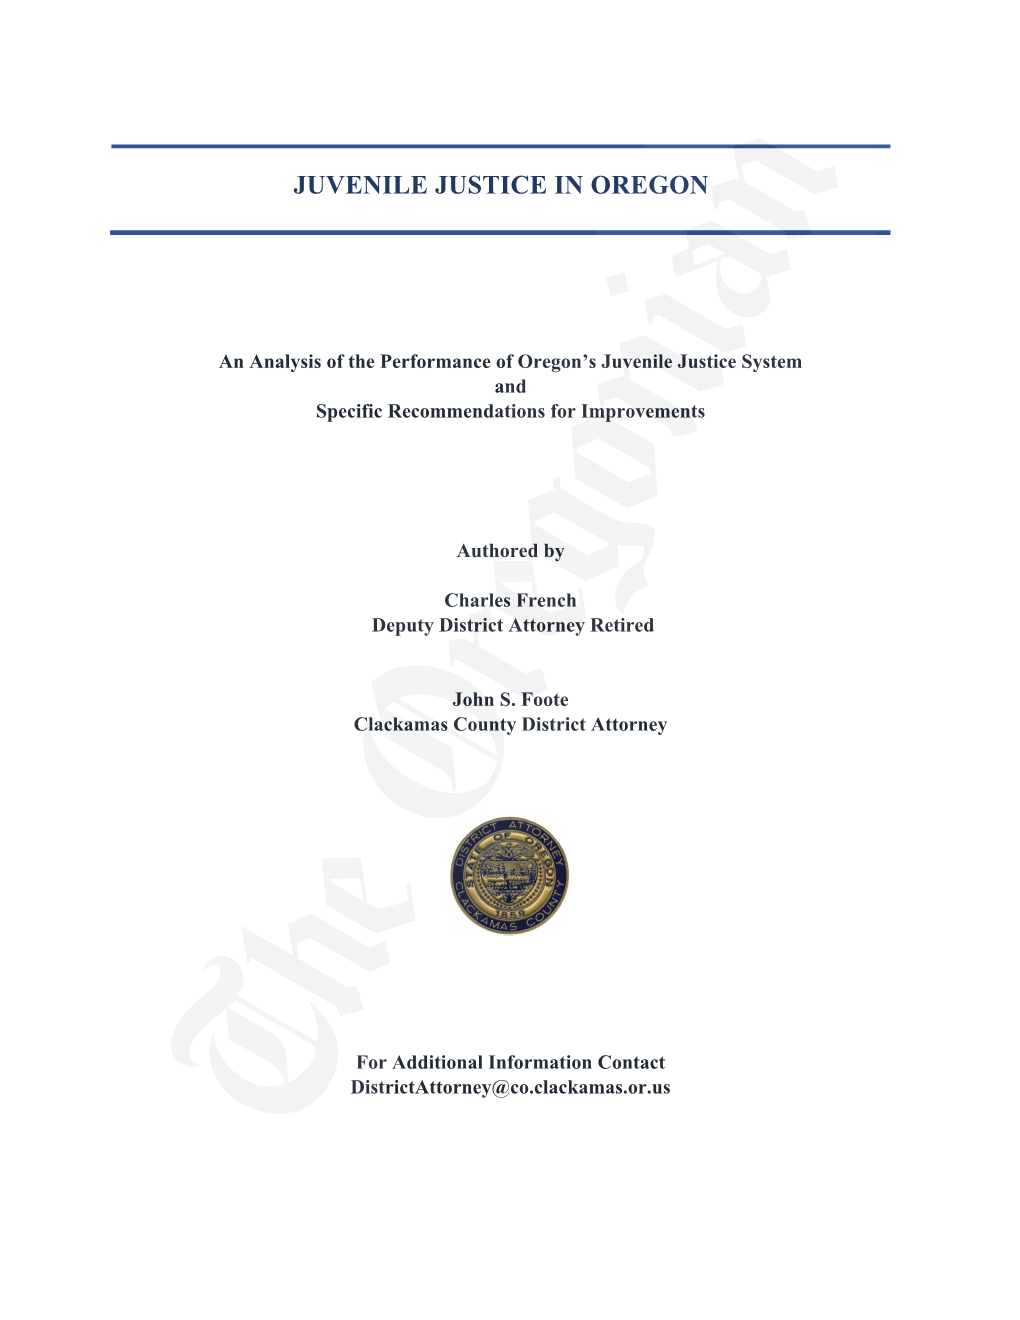 An Analysis of the Performance of Oregon's Juvenile Justice System